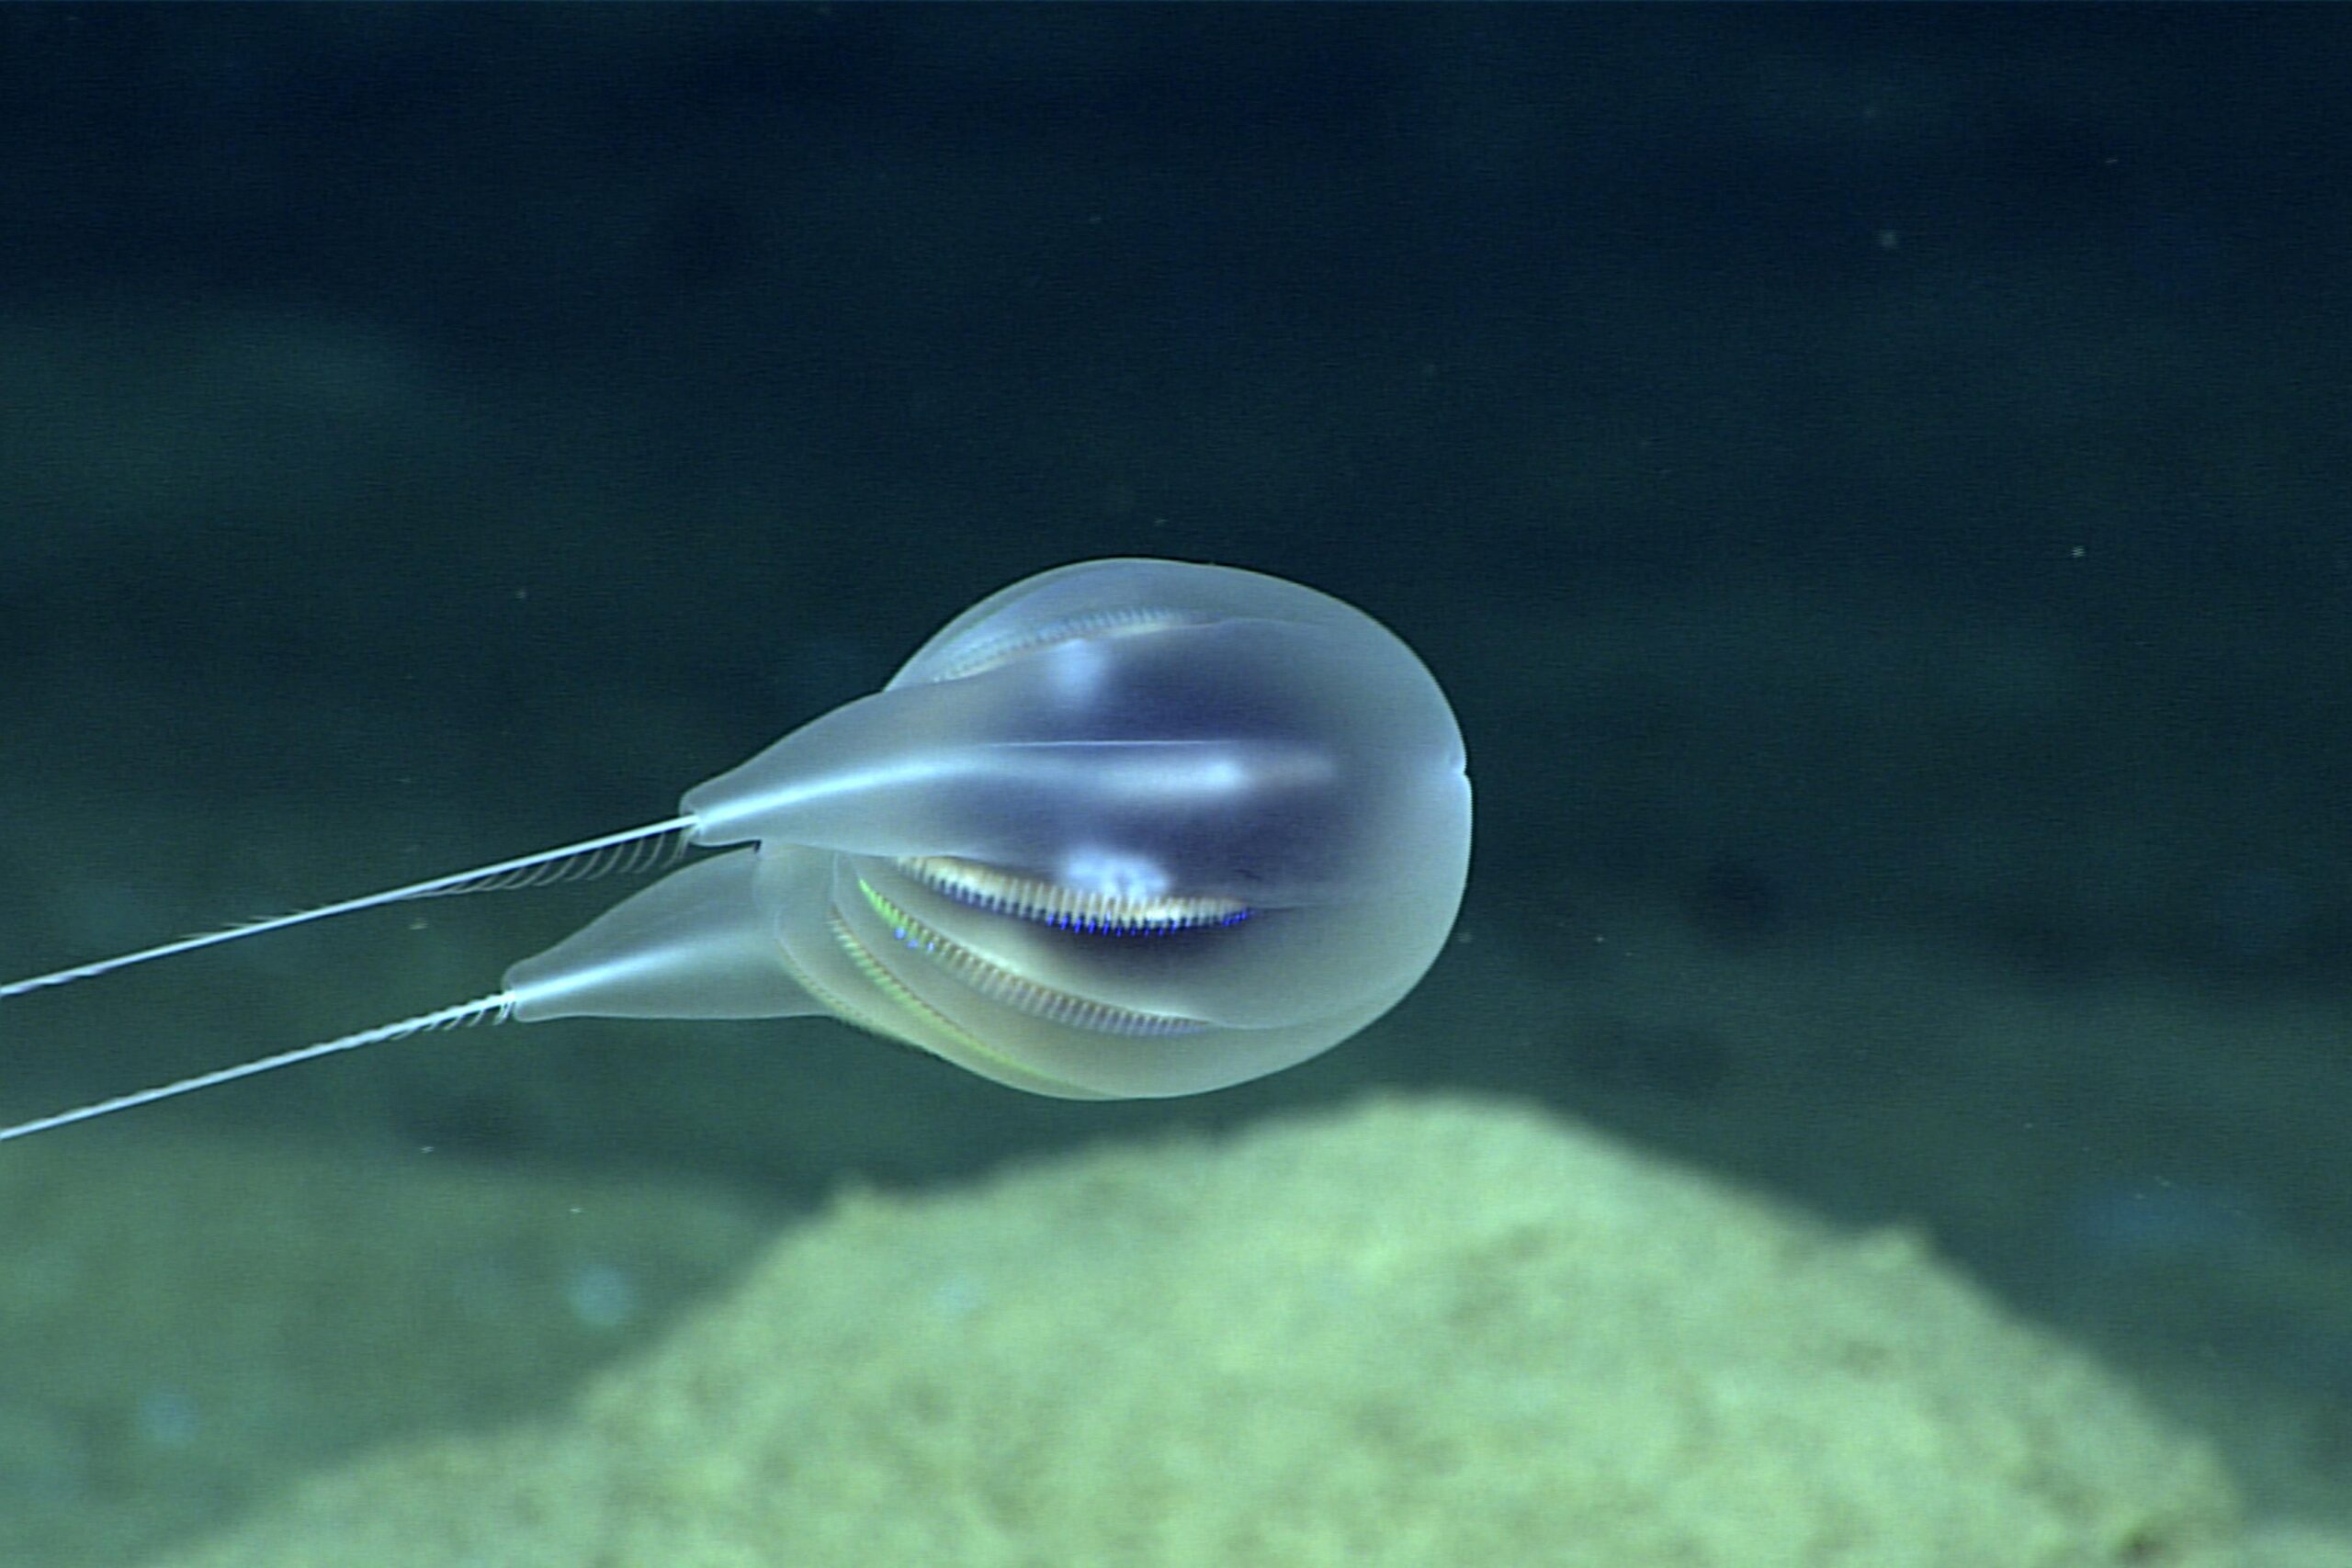 NOAA Scientists Discover New Species Of Translucent Jellyfish Near Puerto Rico